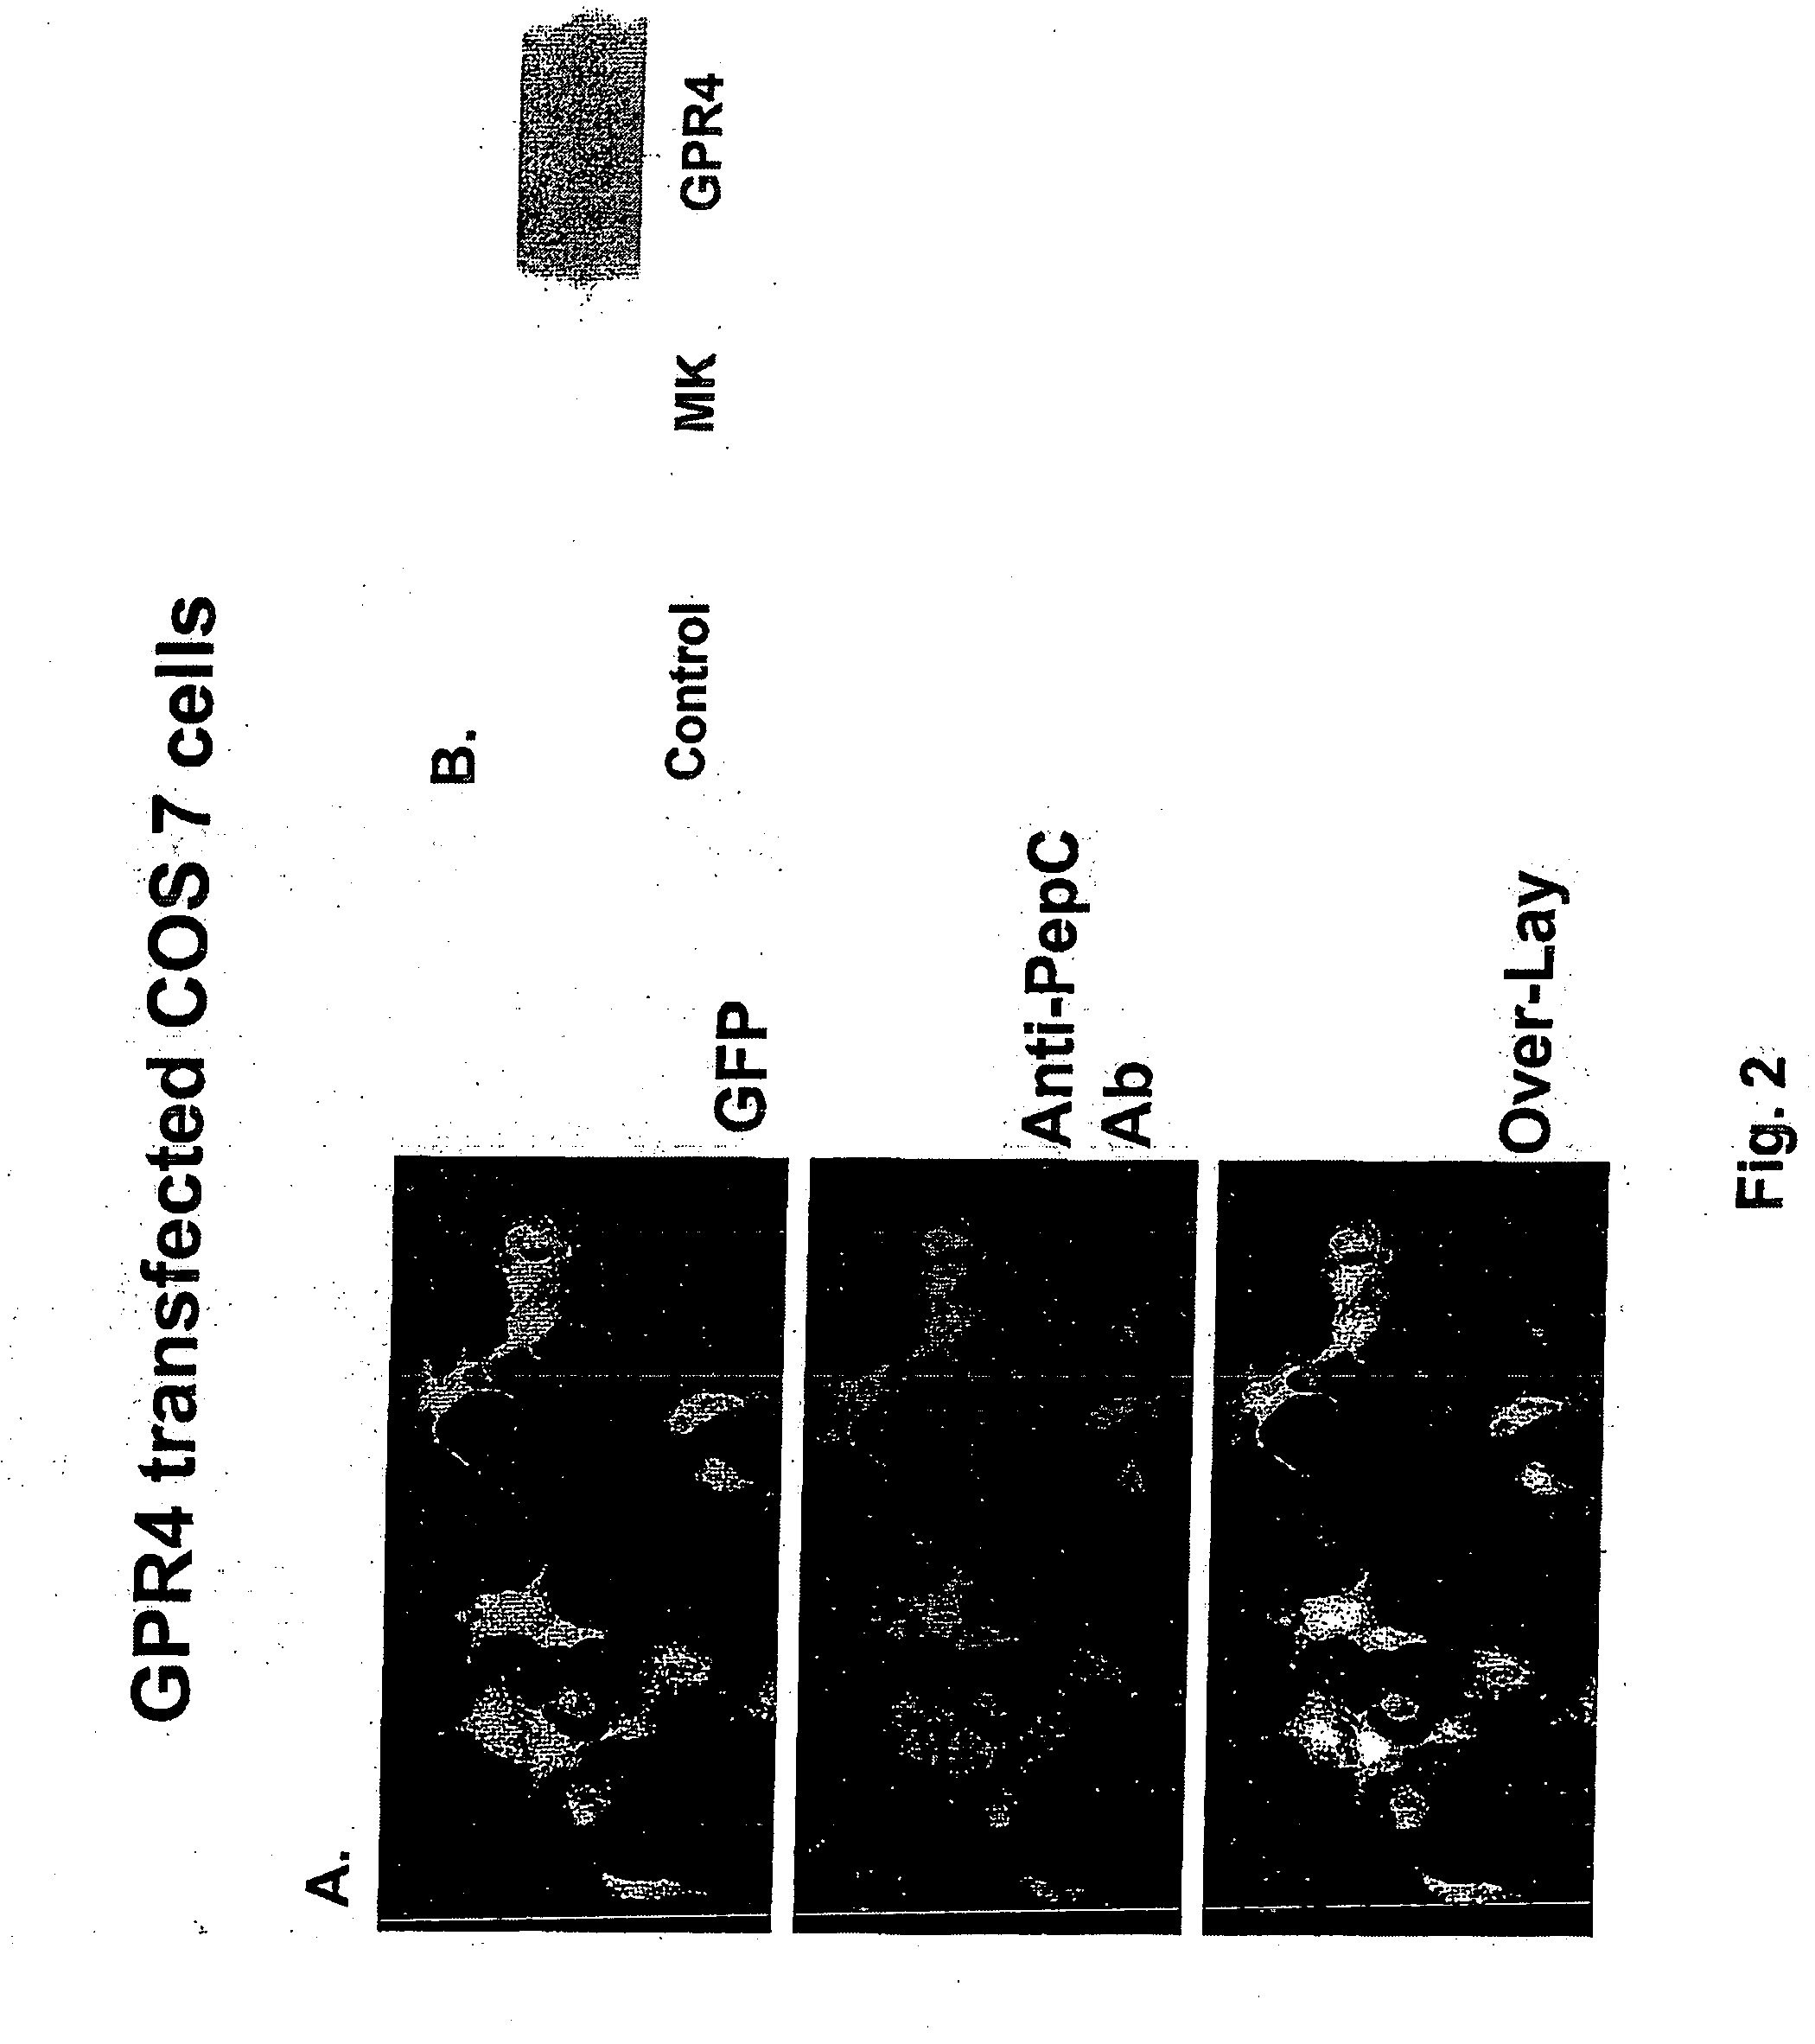 Receptor for lysophosphatidylcholine in vascular endothelial cells and use thereof